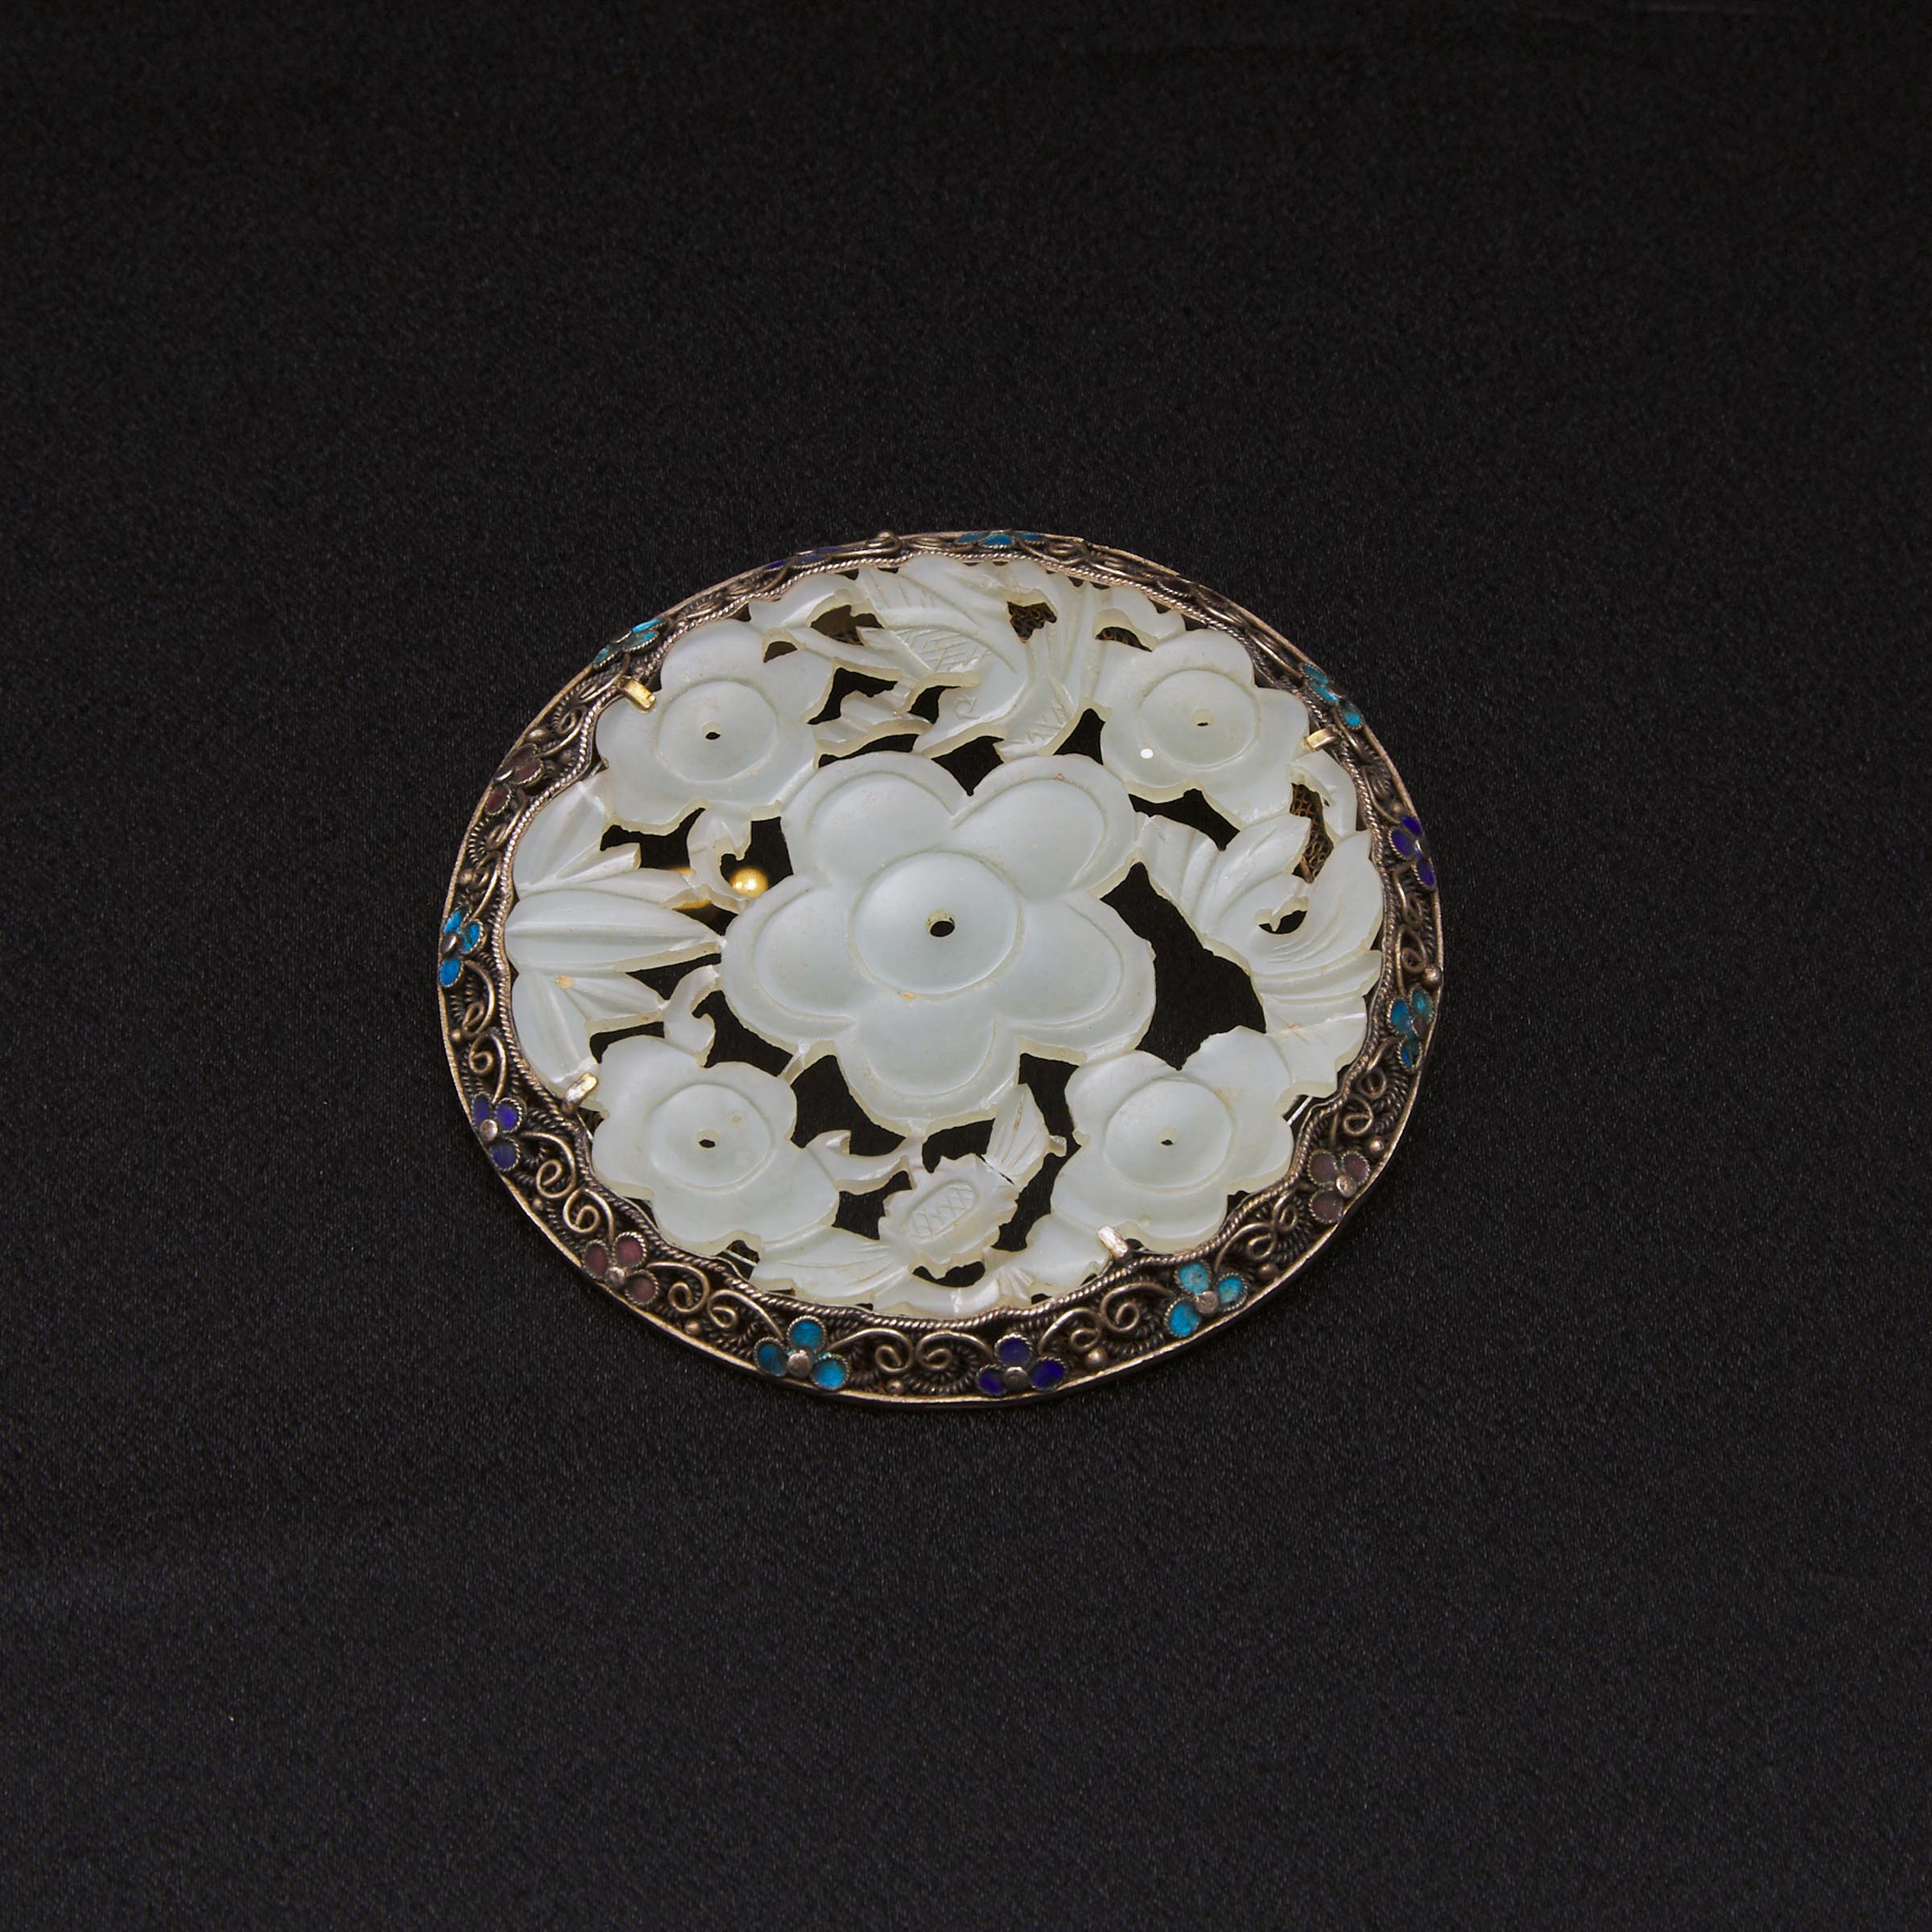 A Jade Plaque and Enamel Inlaid Silver Filigree Brooch, Late Qing Dynasty